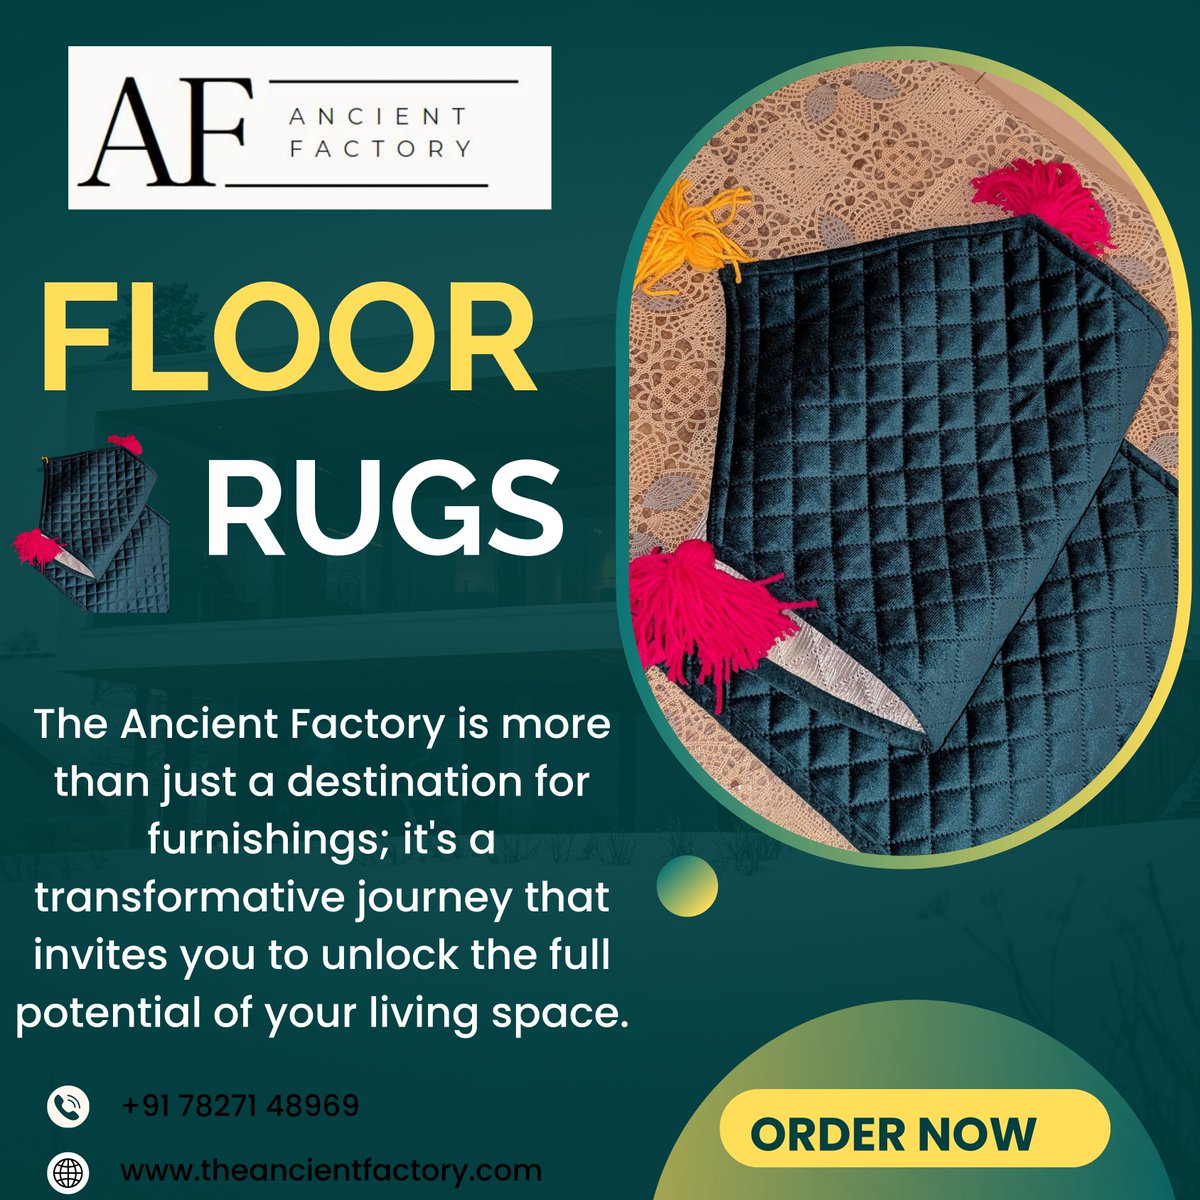 📱 Dial +91 78271 48969 or visit theancientfactory.com to discover the perfect floor rug that complements your home decor.

 💖 #TheAncientFactory #FloorRugs #HomeDecor #EleganceRedefined